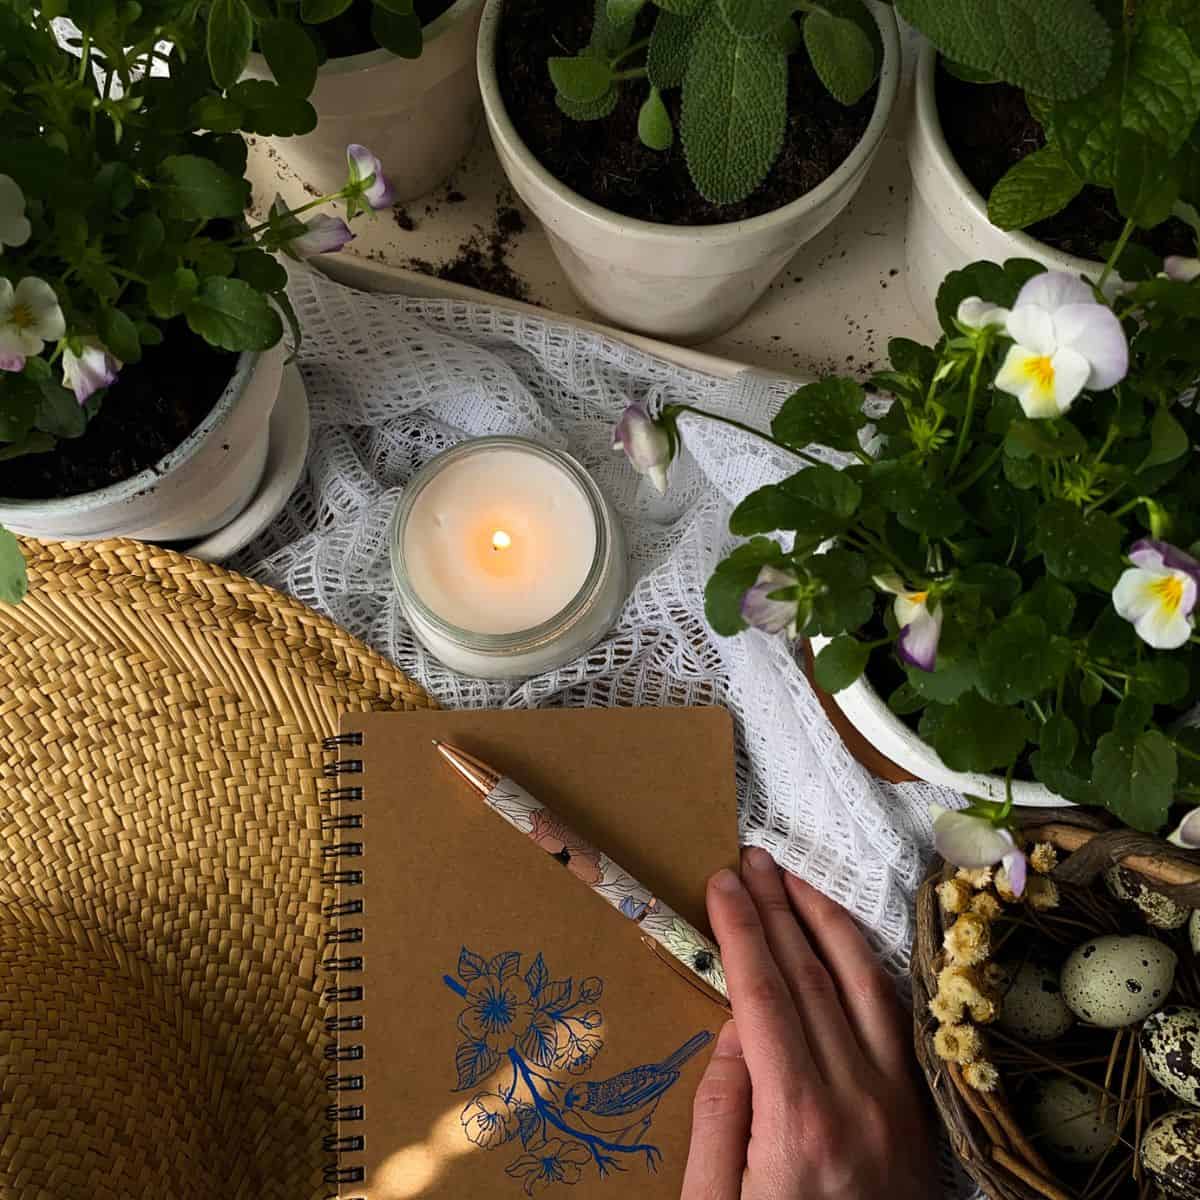 a woman prepares to journal with a candle, hat, plants, and a basket of quail eggs nearby